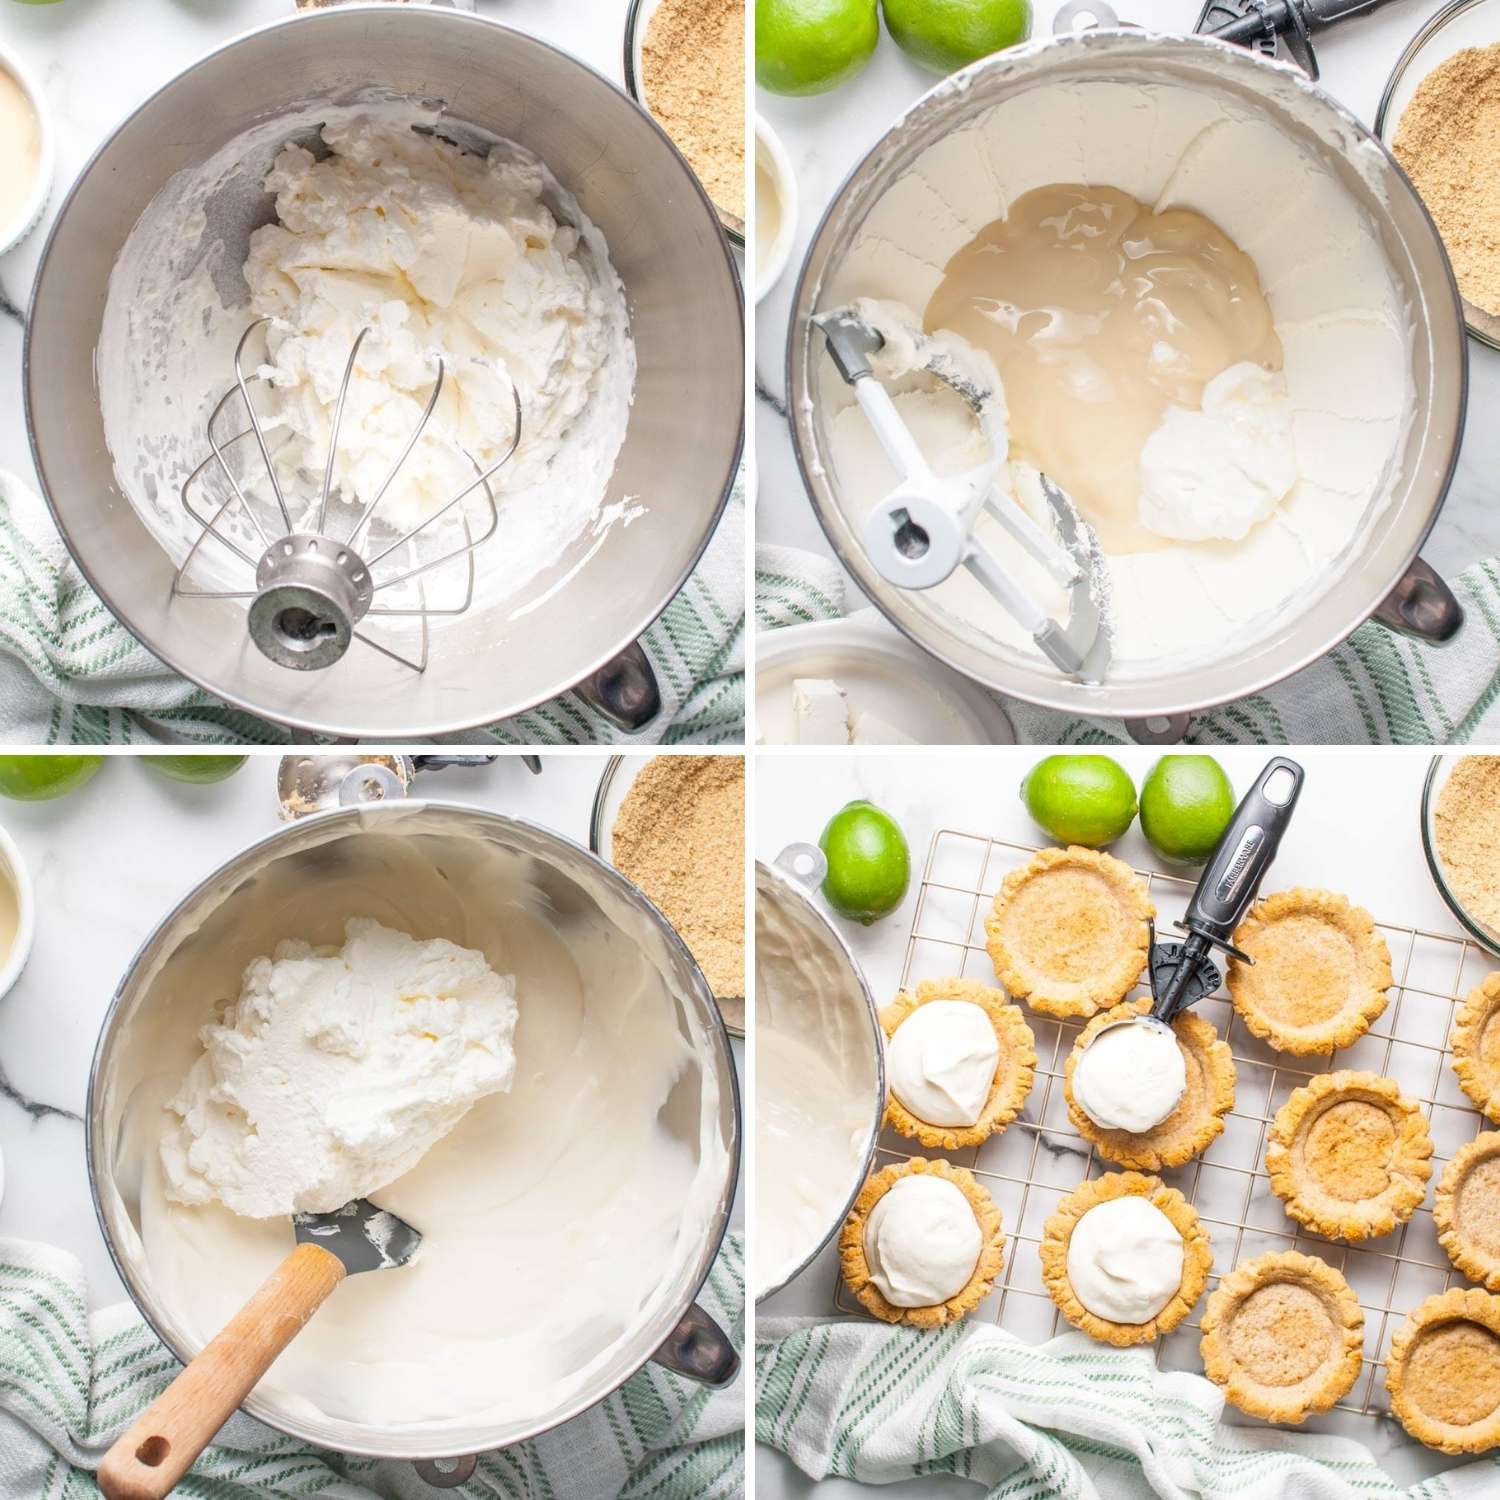 Four photos showing how to make key lime pie filling for crumbl cookies